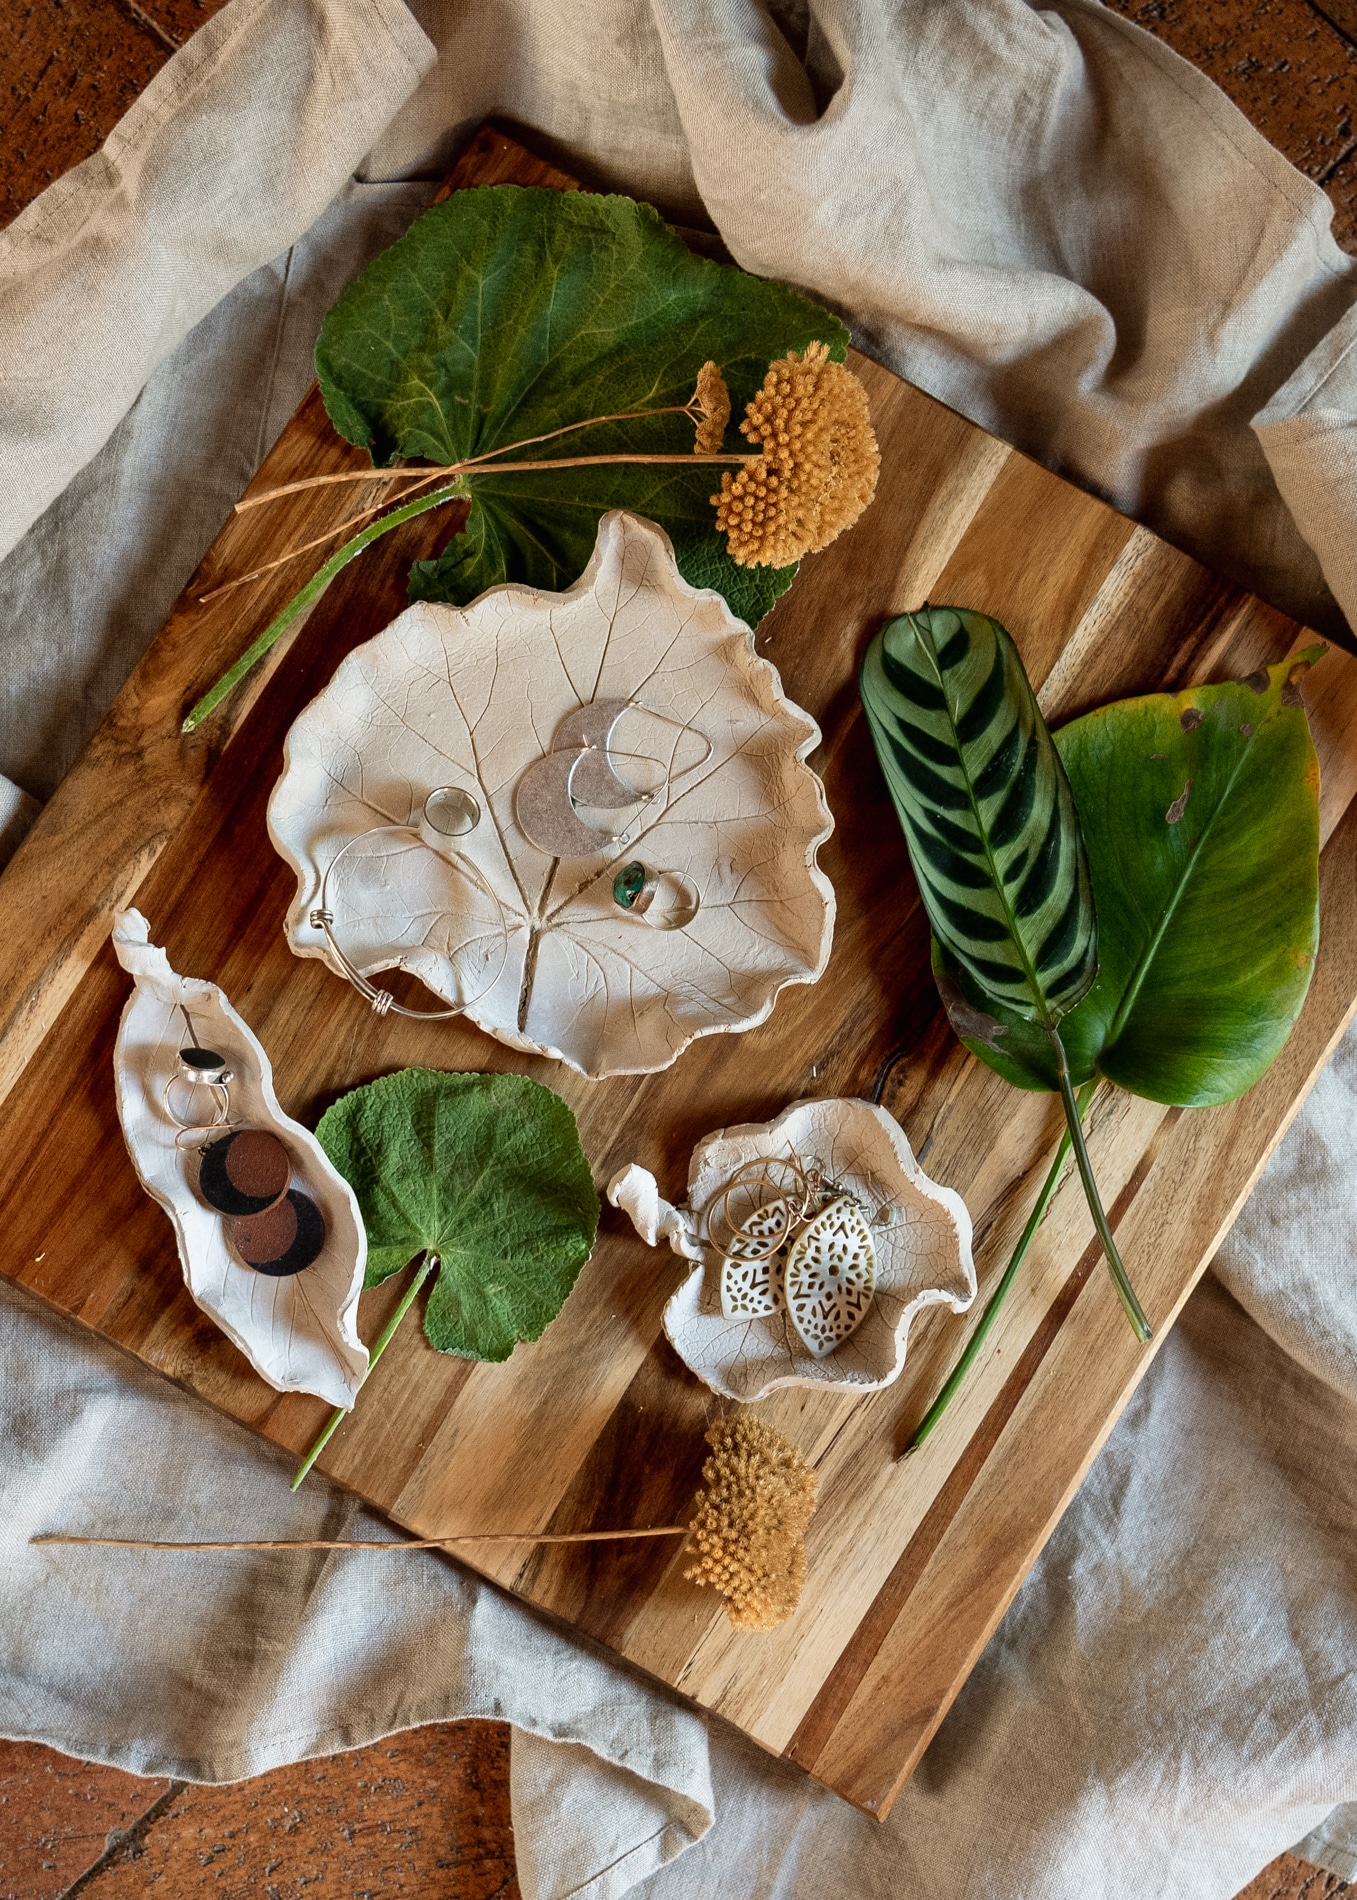 Jewelry dish made with leaf imprints and clay.